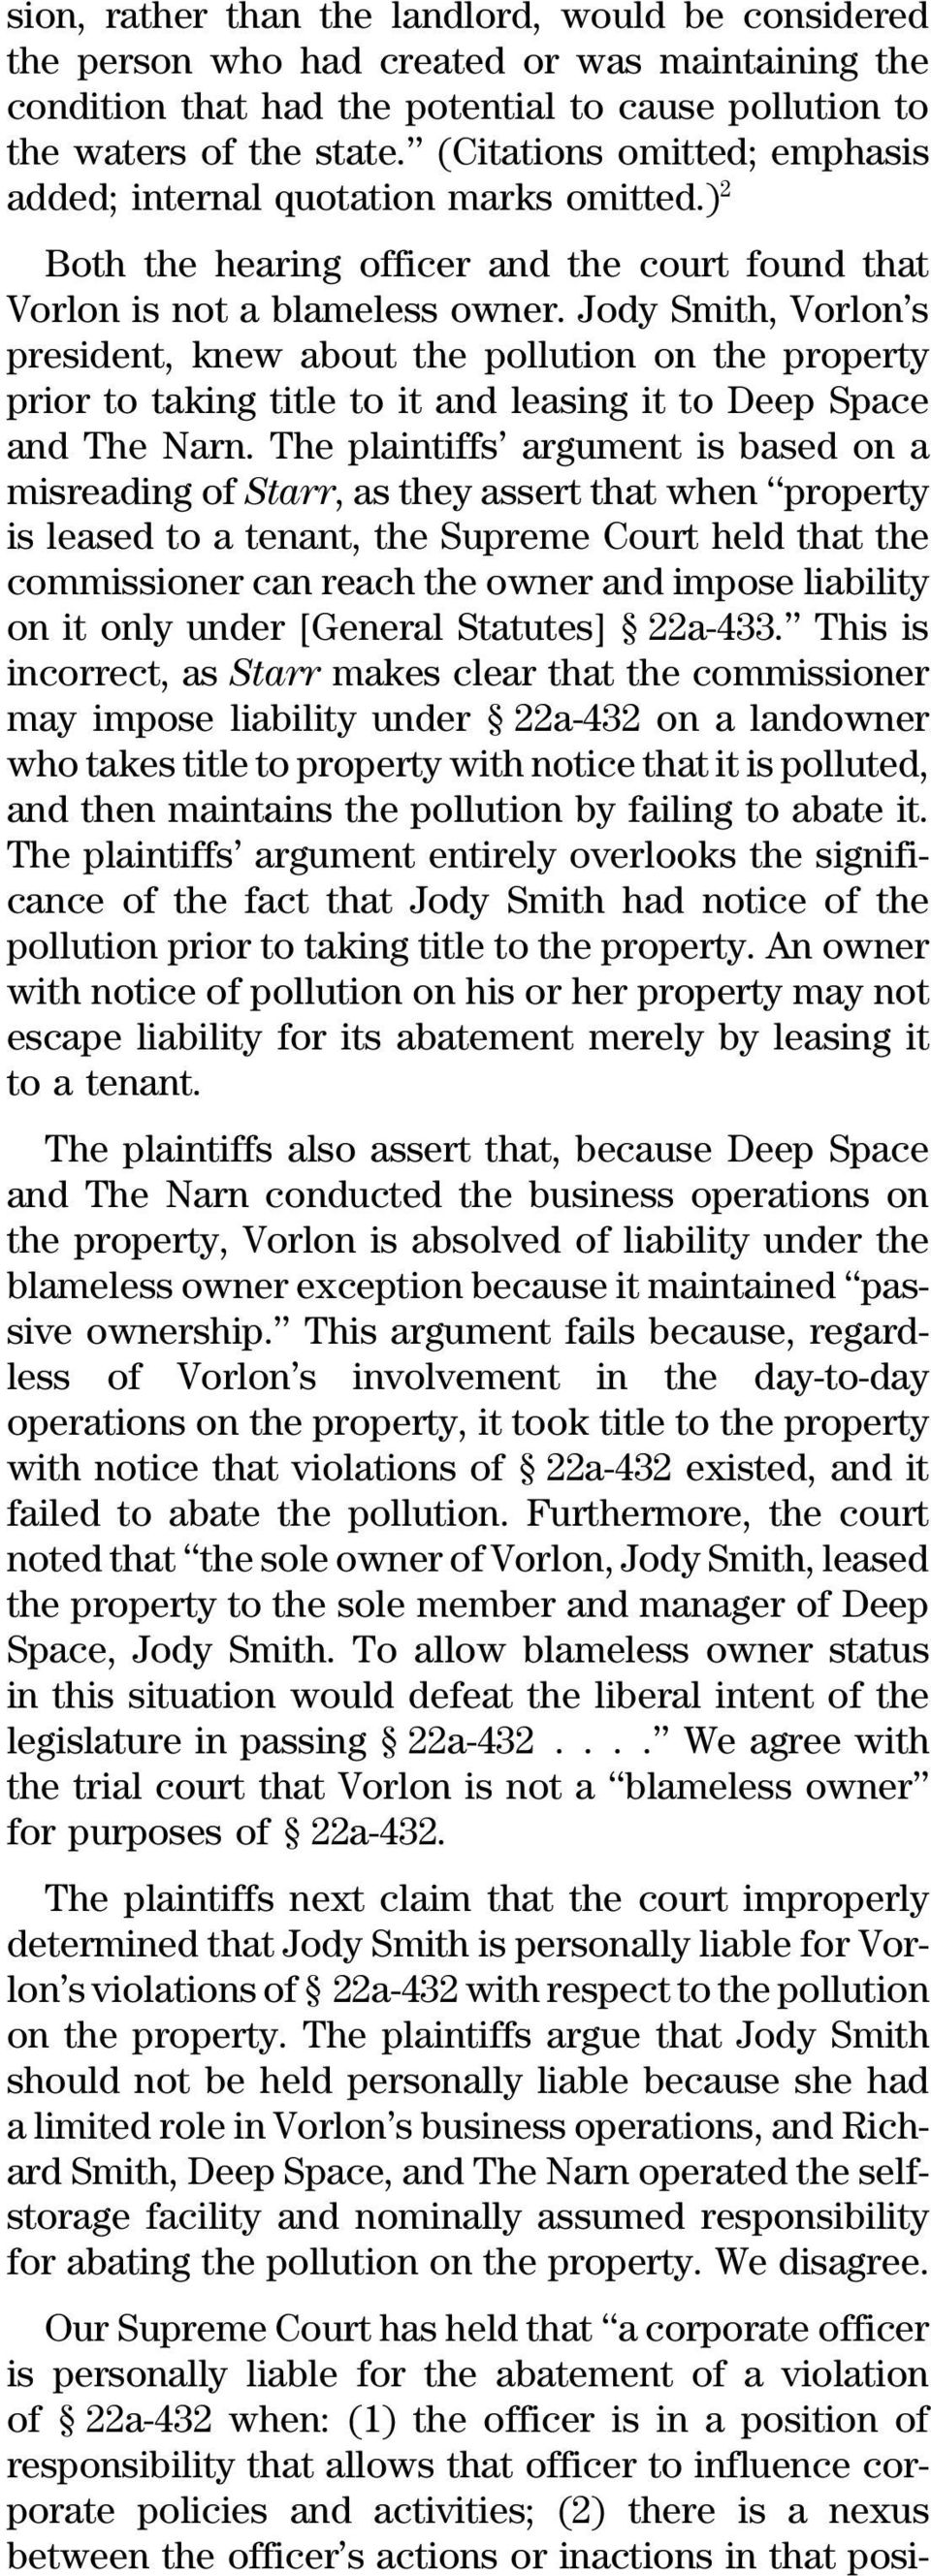 Jody Smith, Vorlon s president, knew about the pollution on the property prior to taking title to it and leasing it to Deep Space and The Narn.